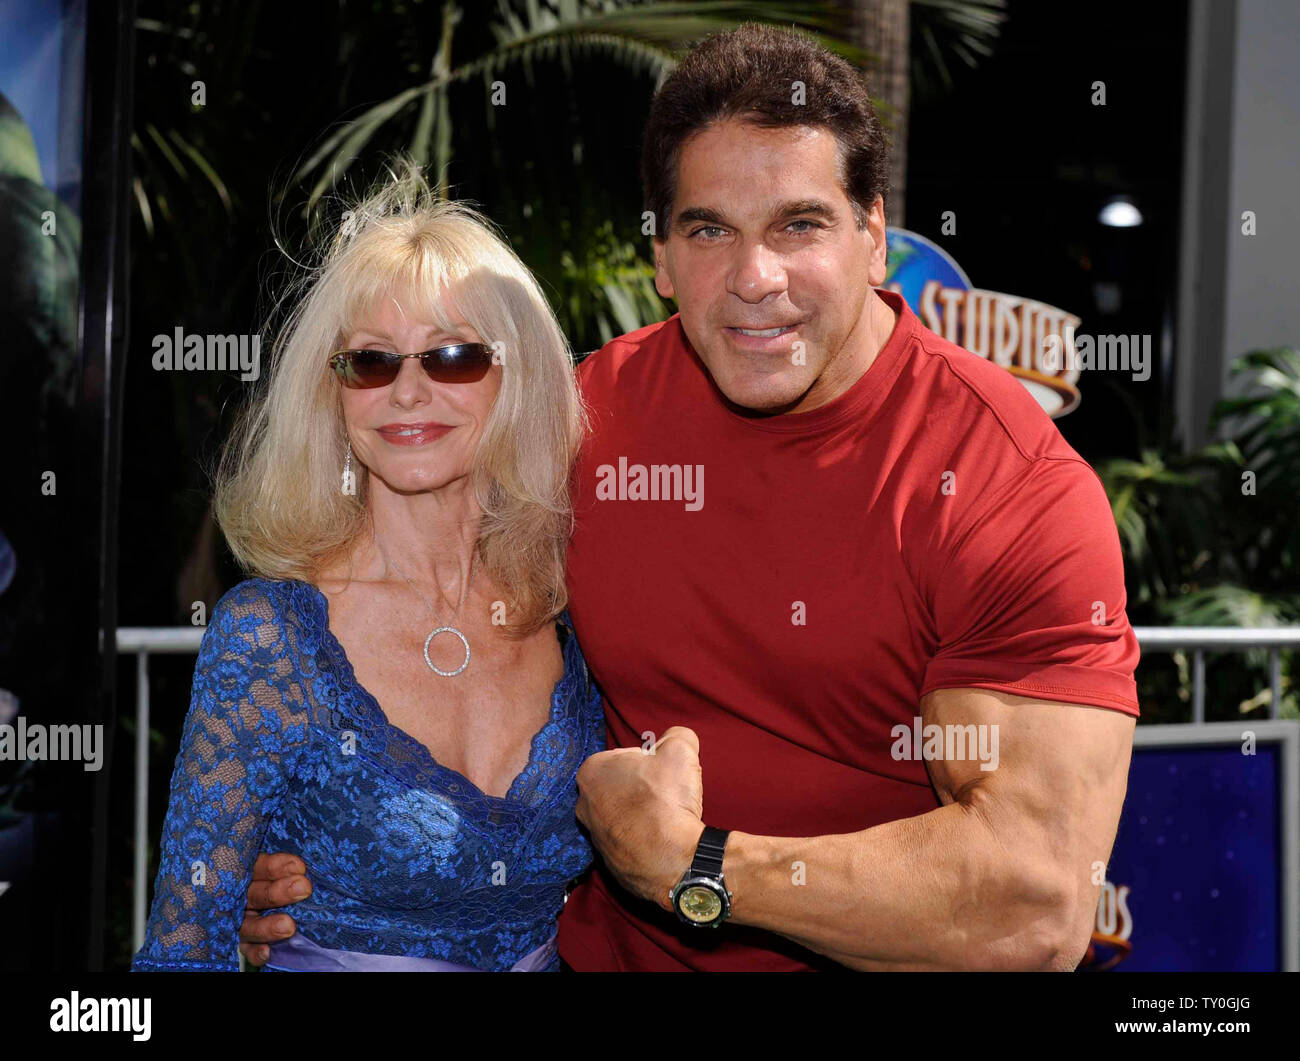 Actor Lou Ferrigno (R) and wife Carla attend the premiere of the film 'The Incredible Hulk'  in Los Angeles on June 8, 2008. (UPI Photo/ Phil McCarten) Stock Photo